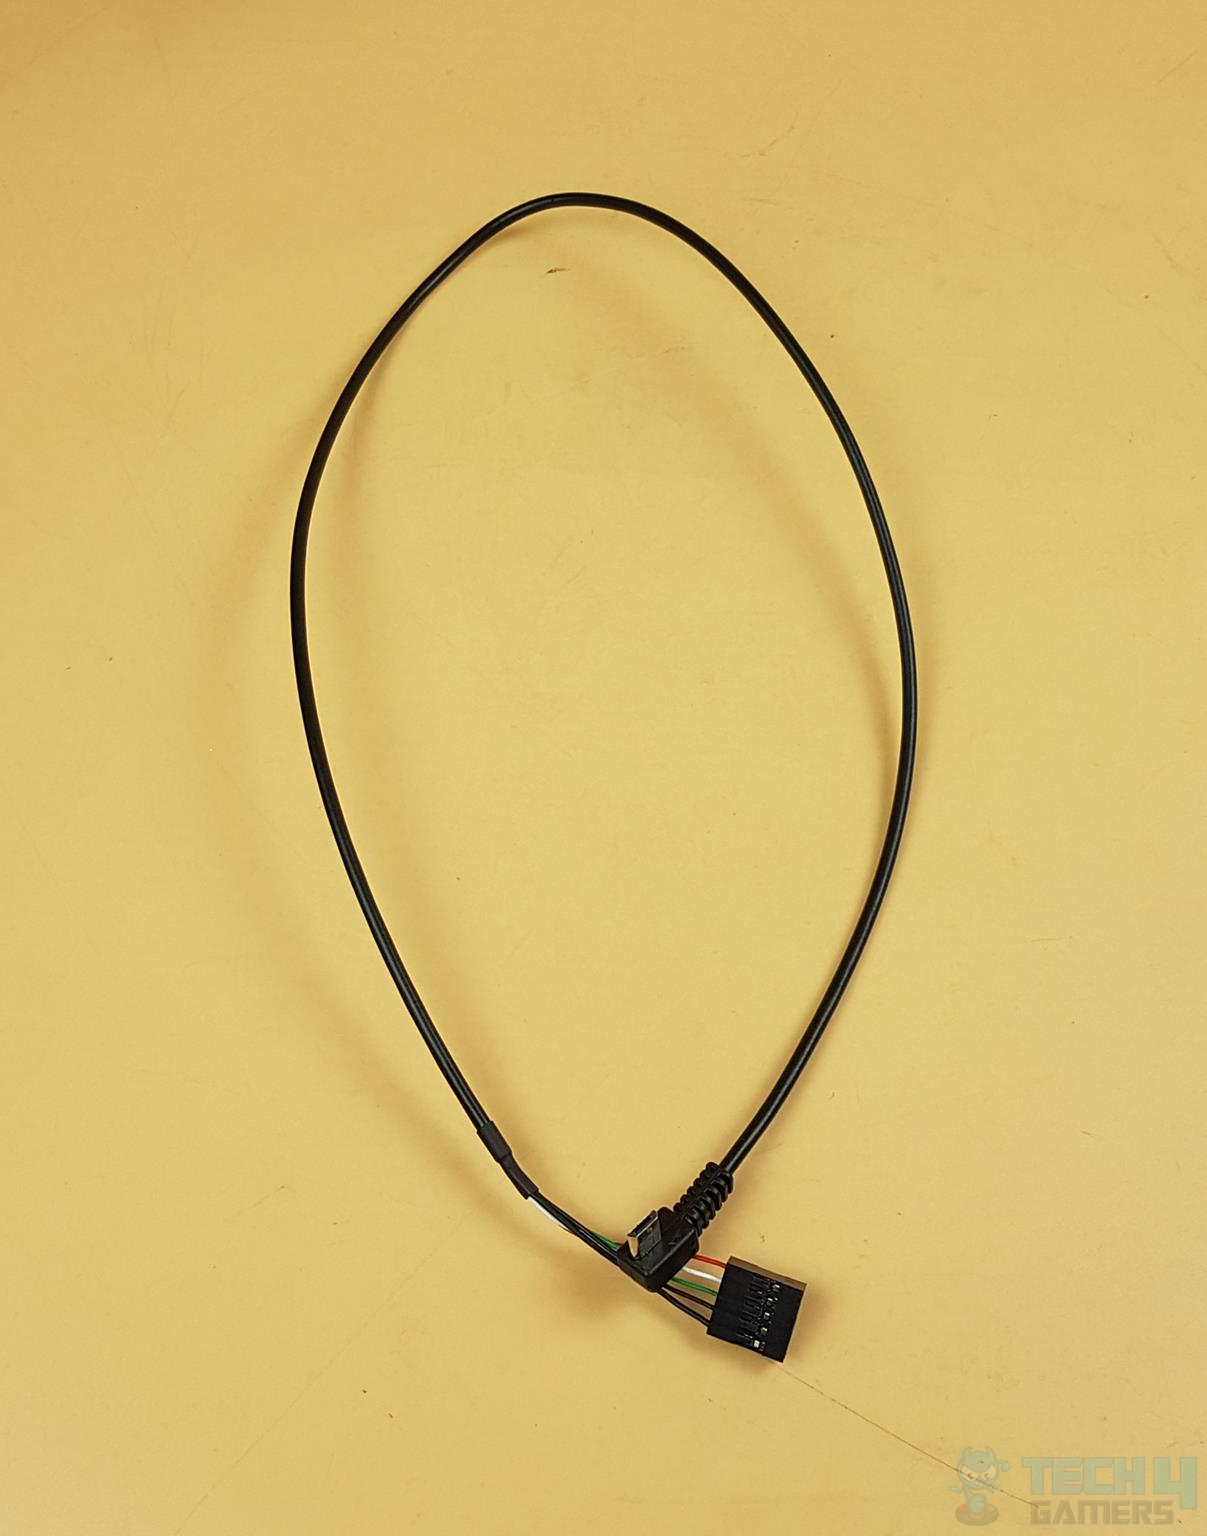 AORUS WATERFORCE X 280 Micro-USB Cable for the Pump Block